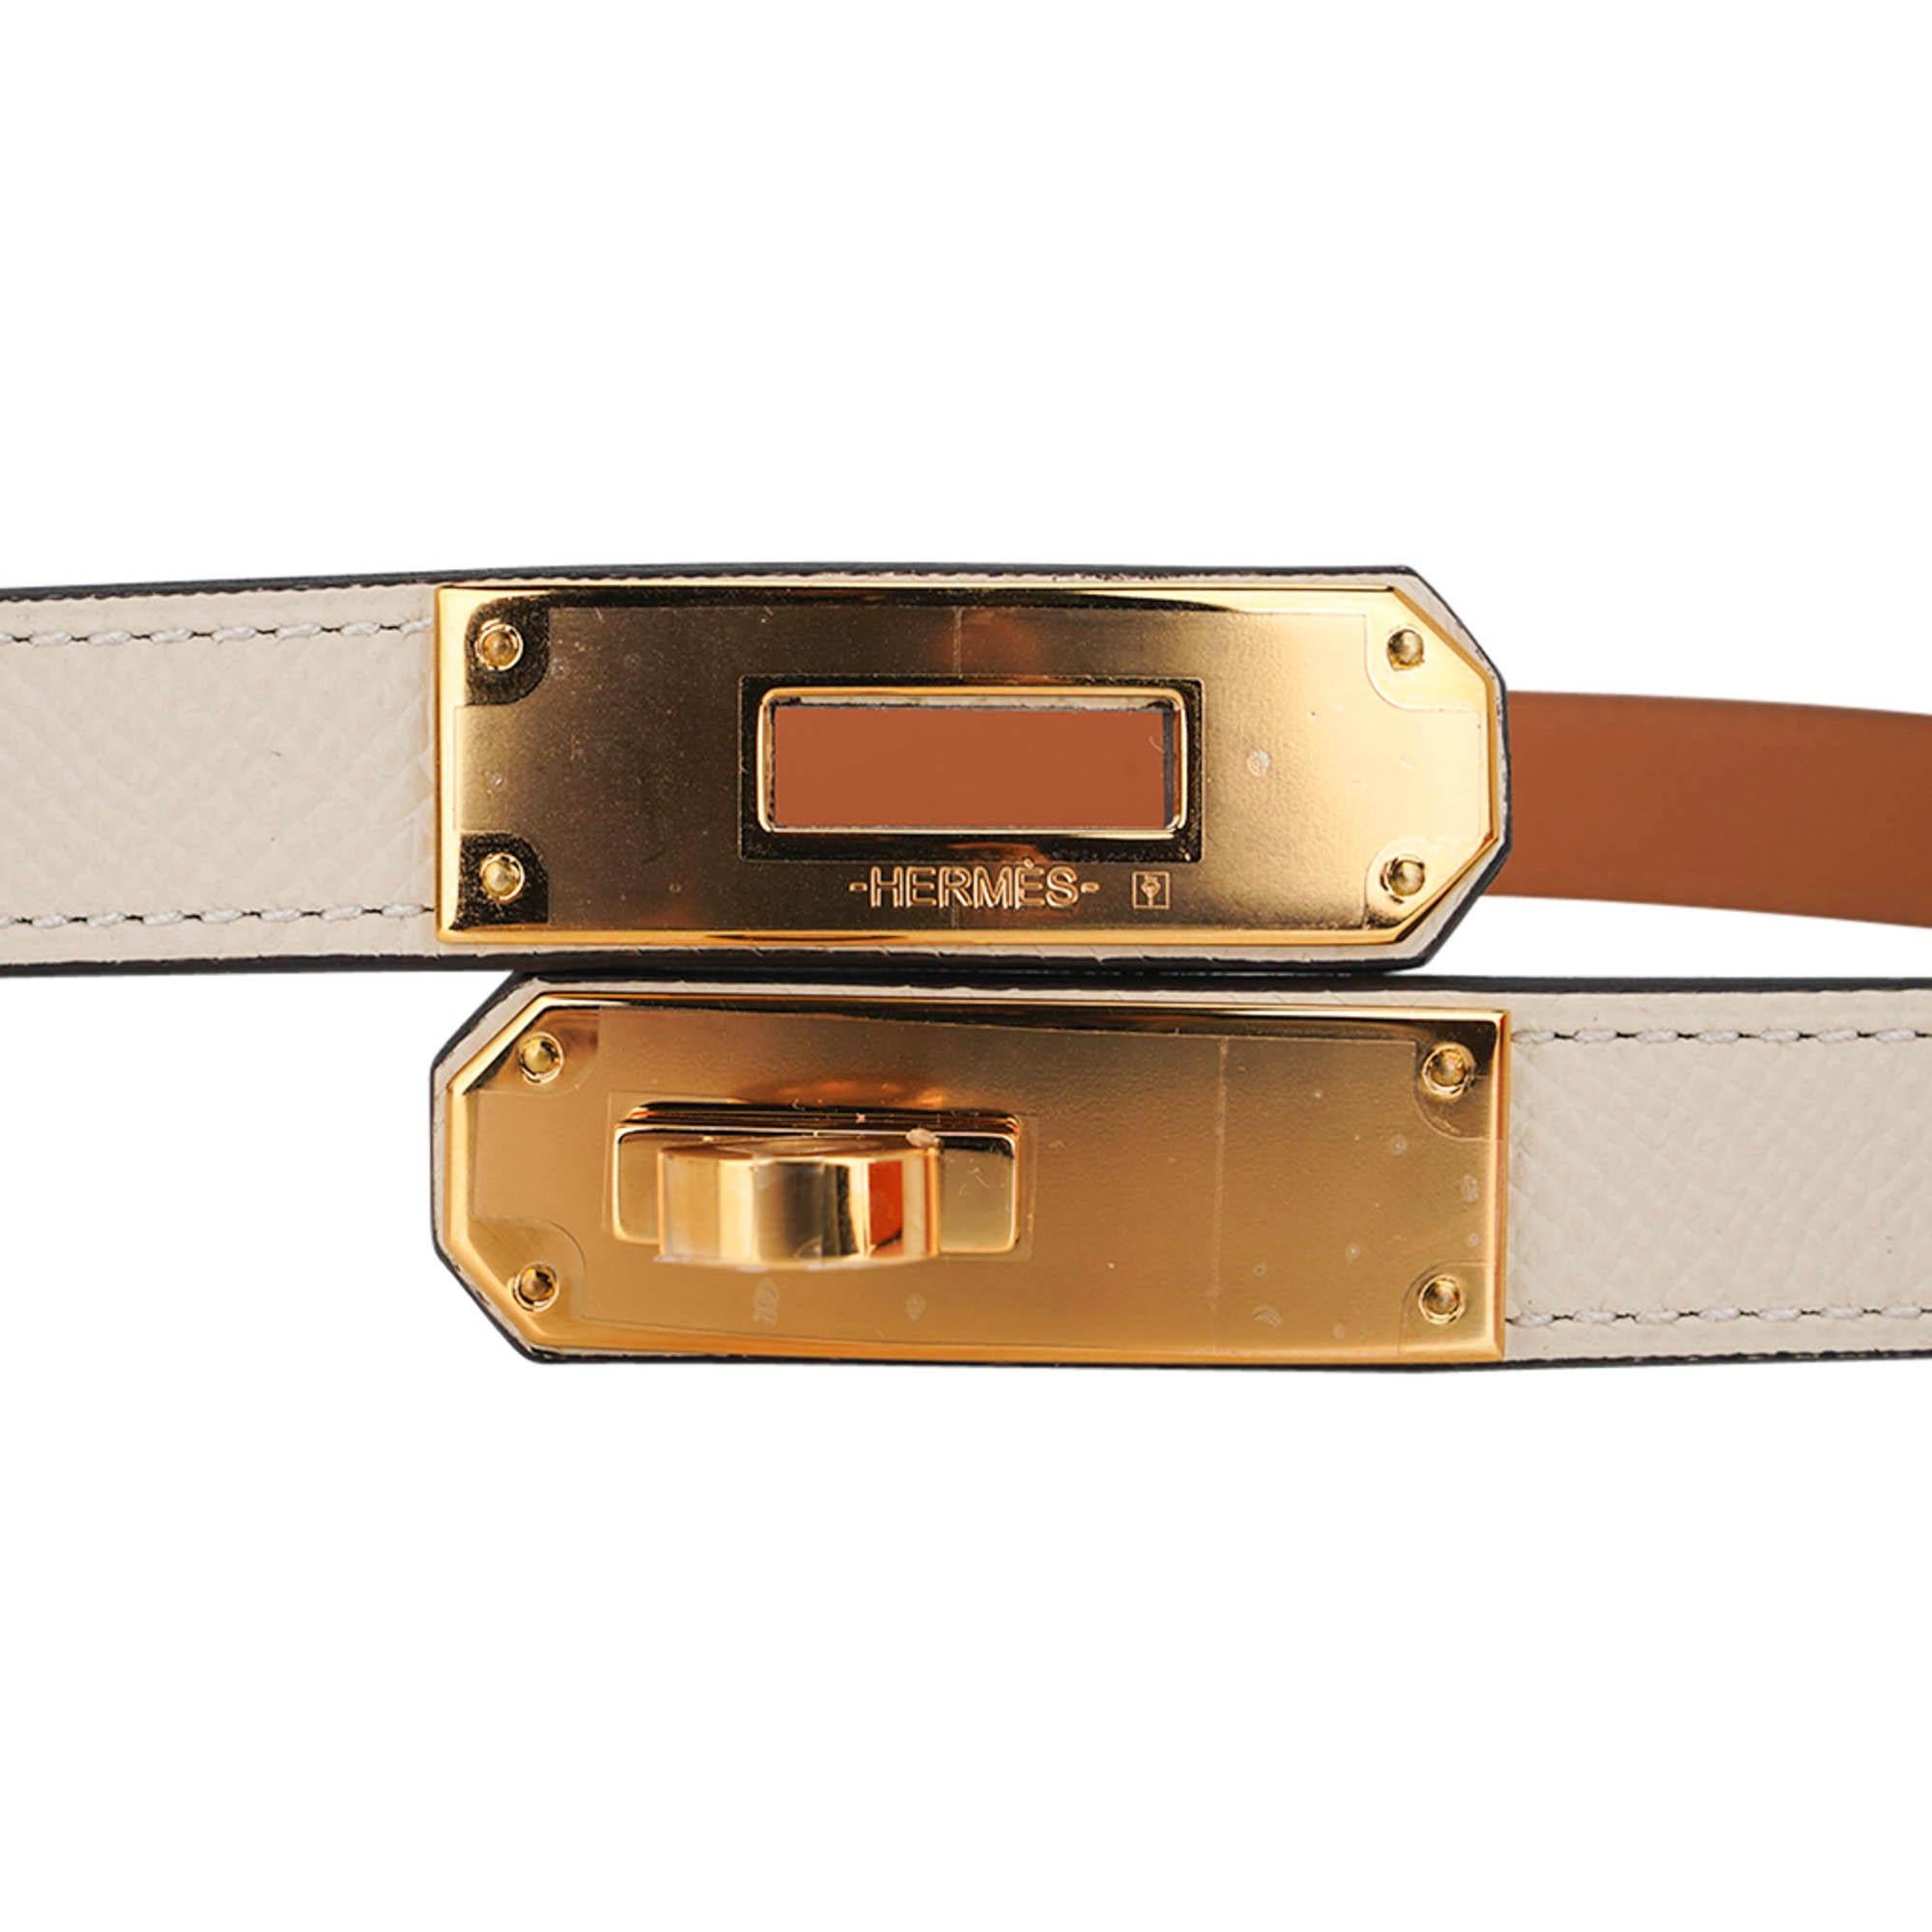 Mightychic offers a limited edition Hermes Kelly Pocket Belt featured in neutral Craie.
Stunning with Gold hardware Kelly Buckle set on Epsom leather.
Super versatile: belt can be worn with or without Pouch and can be adjusted between 23.5